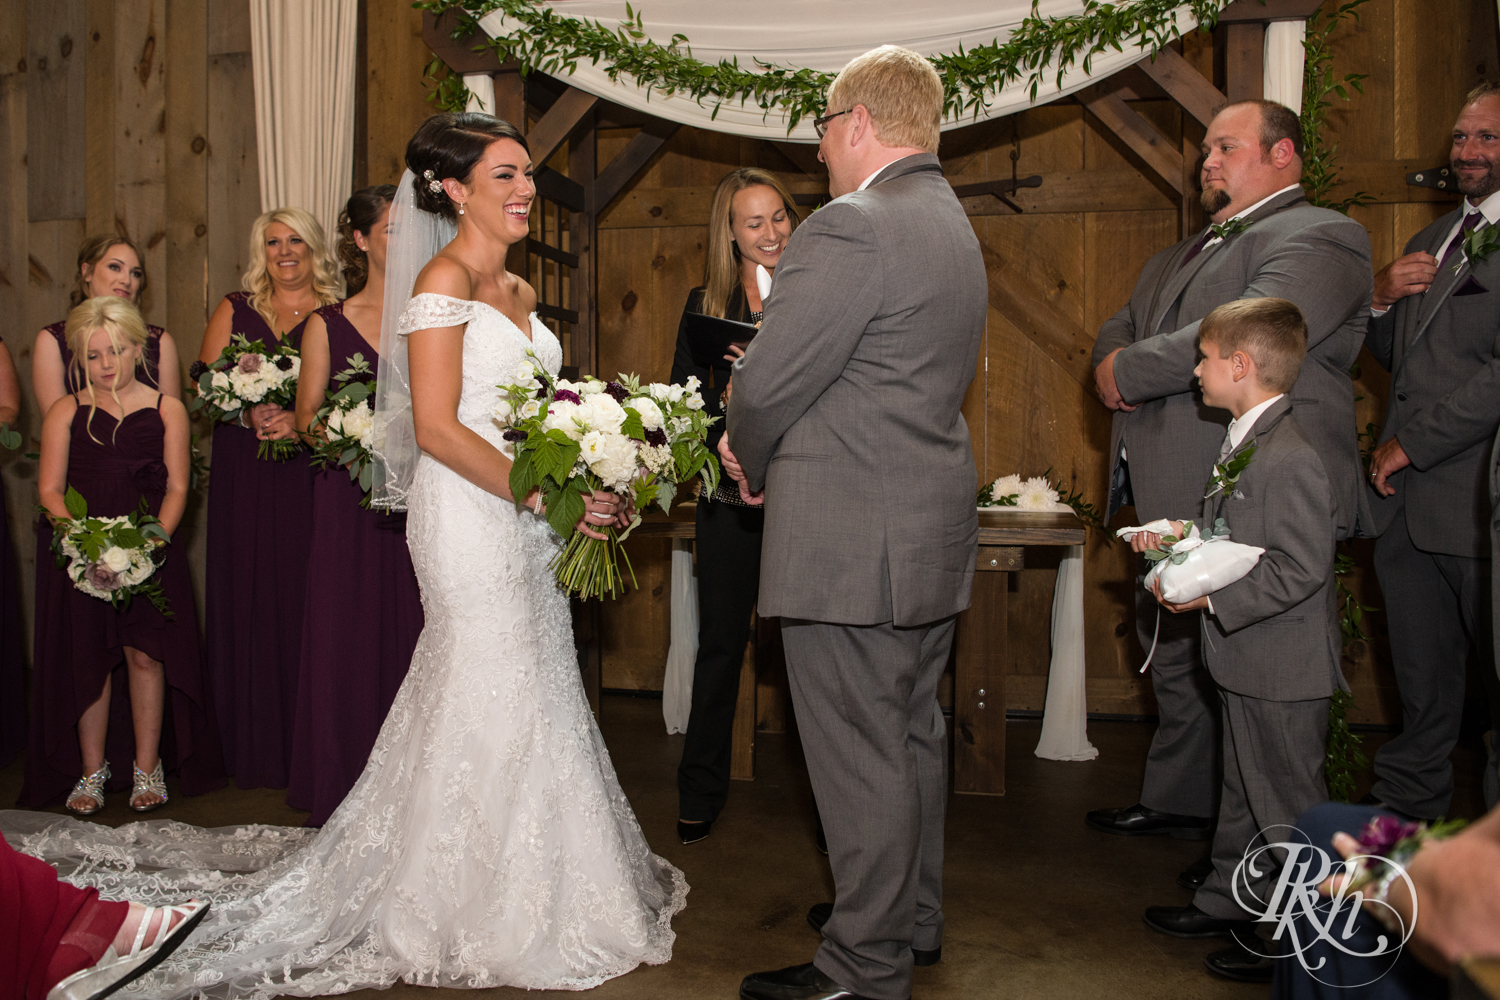 Bride and groom laugh during ceremony at Creekside Farm Weddings and Events in Rush City, Minnesota.